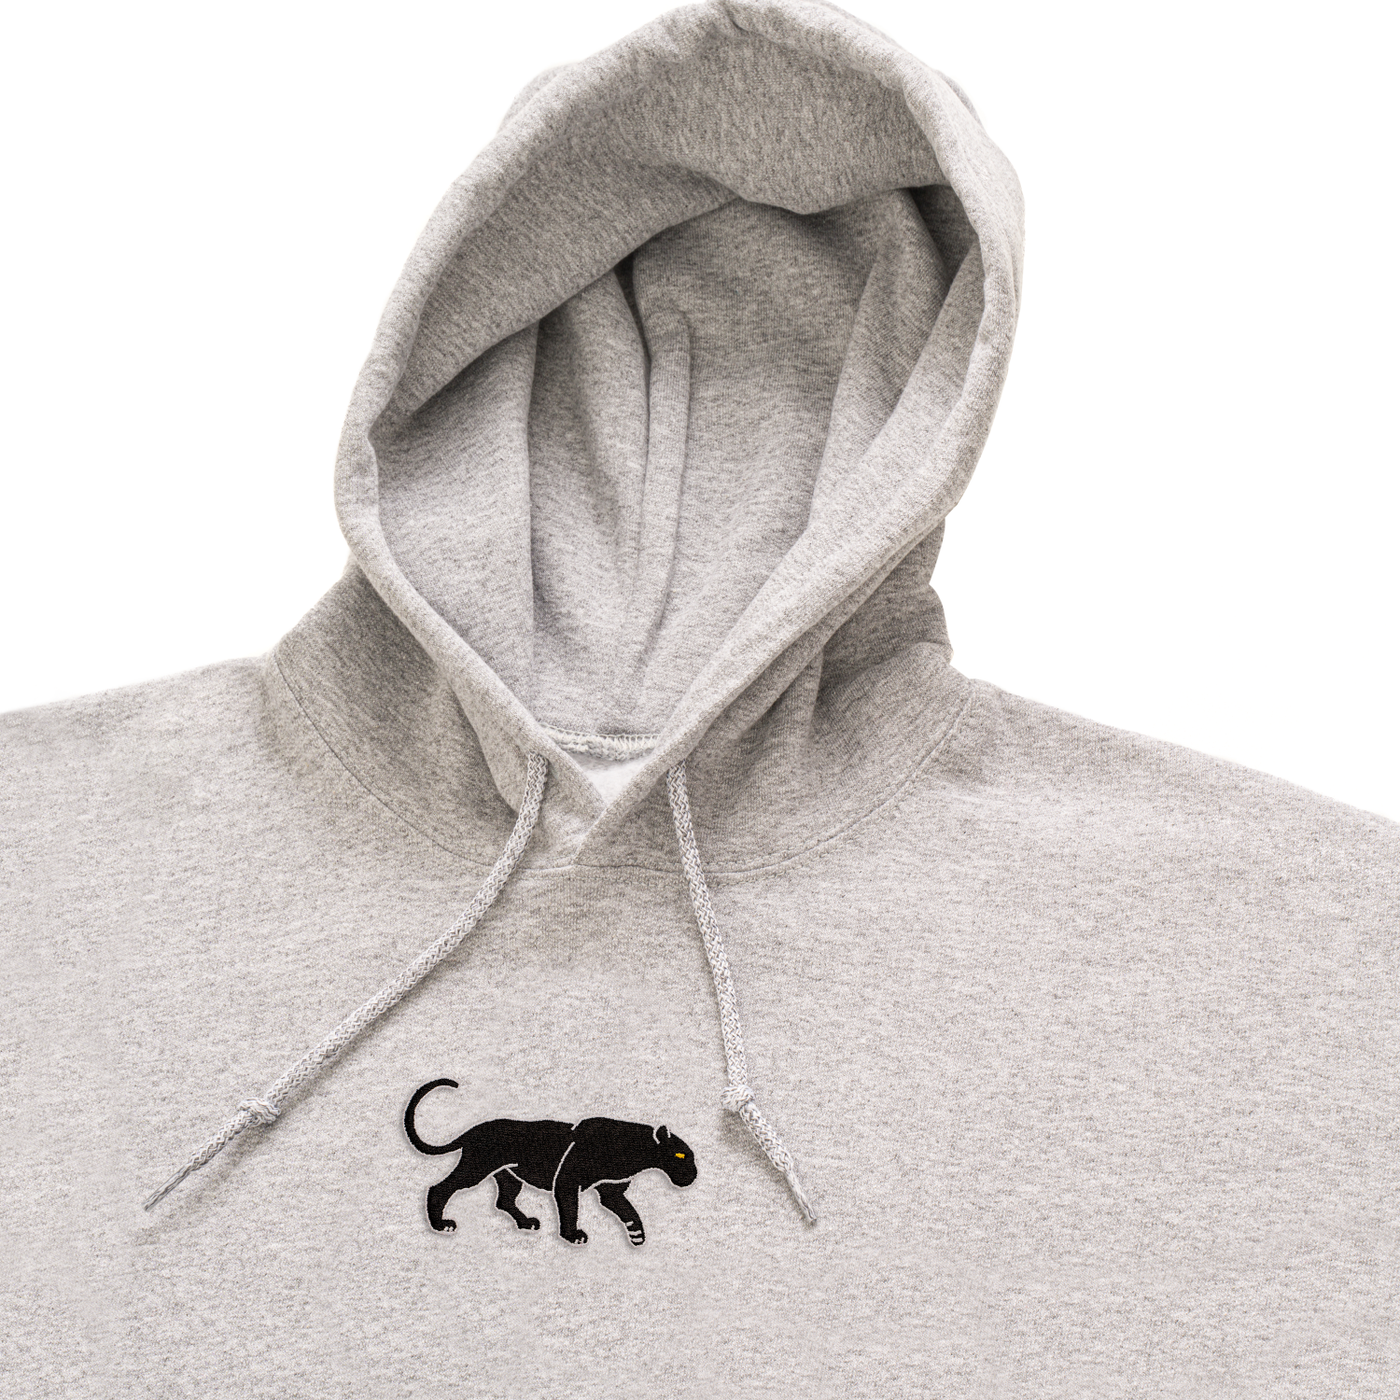 Bobby's Planet Men's Embroidered Black Jaguar Hoodie from South American Amazon Animals Collection in Sport Grey Color#color_sport-grey